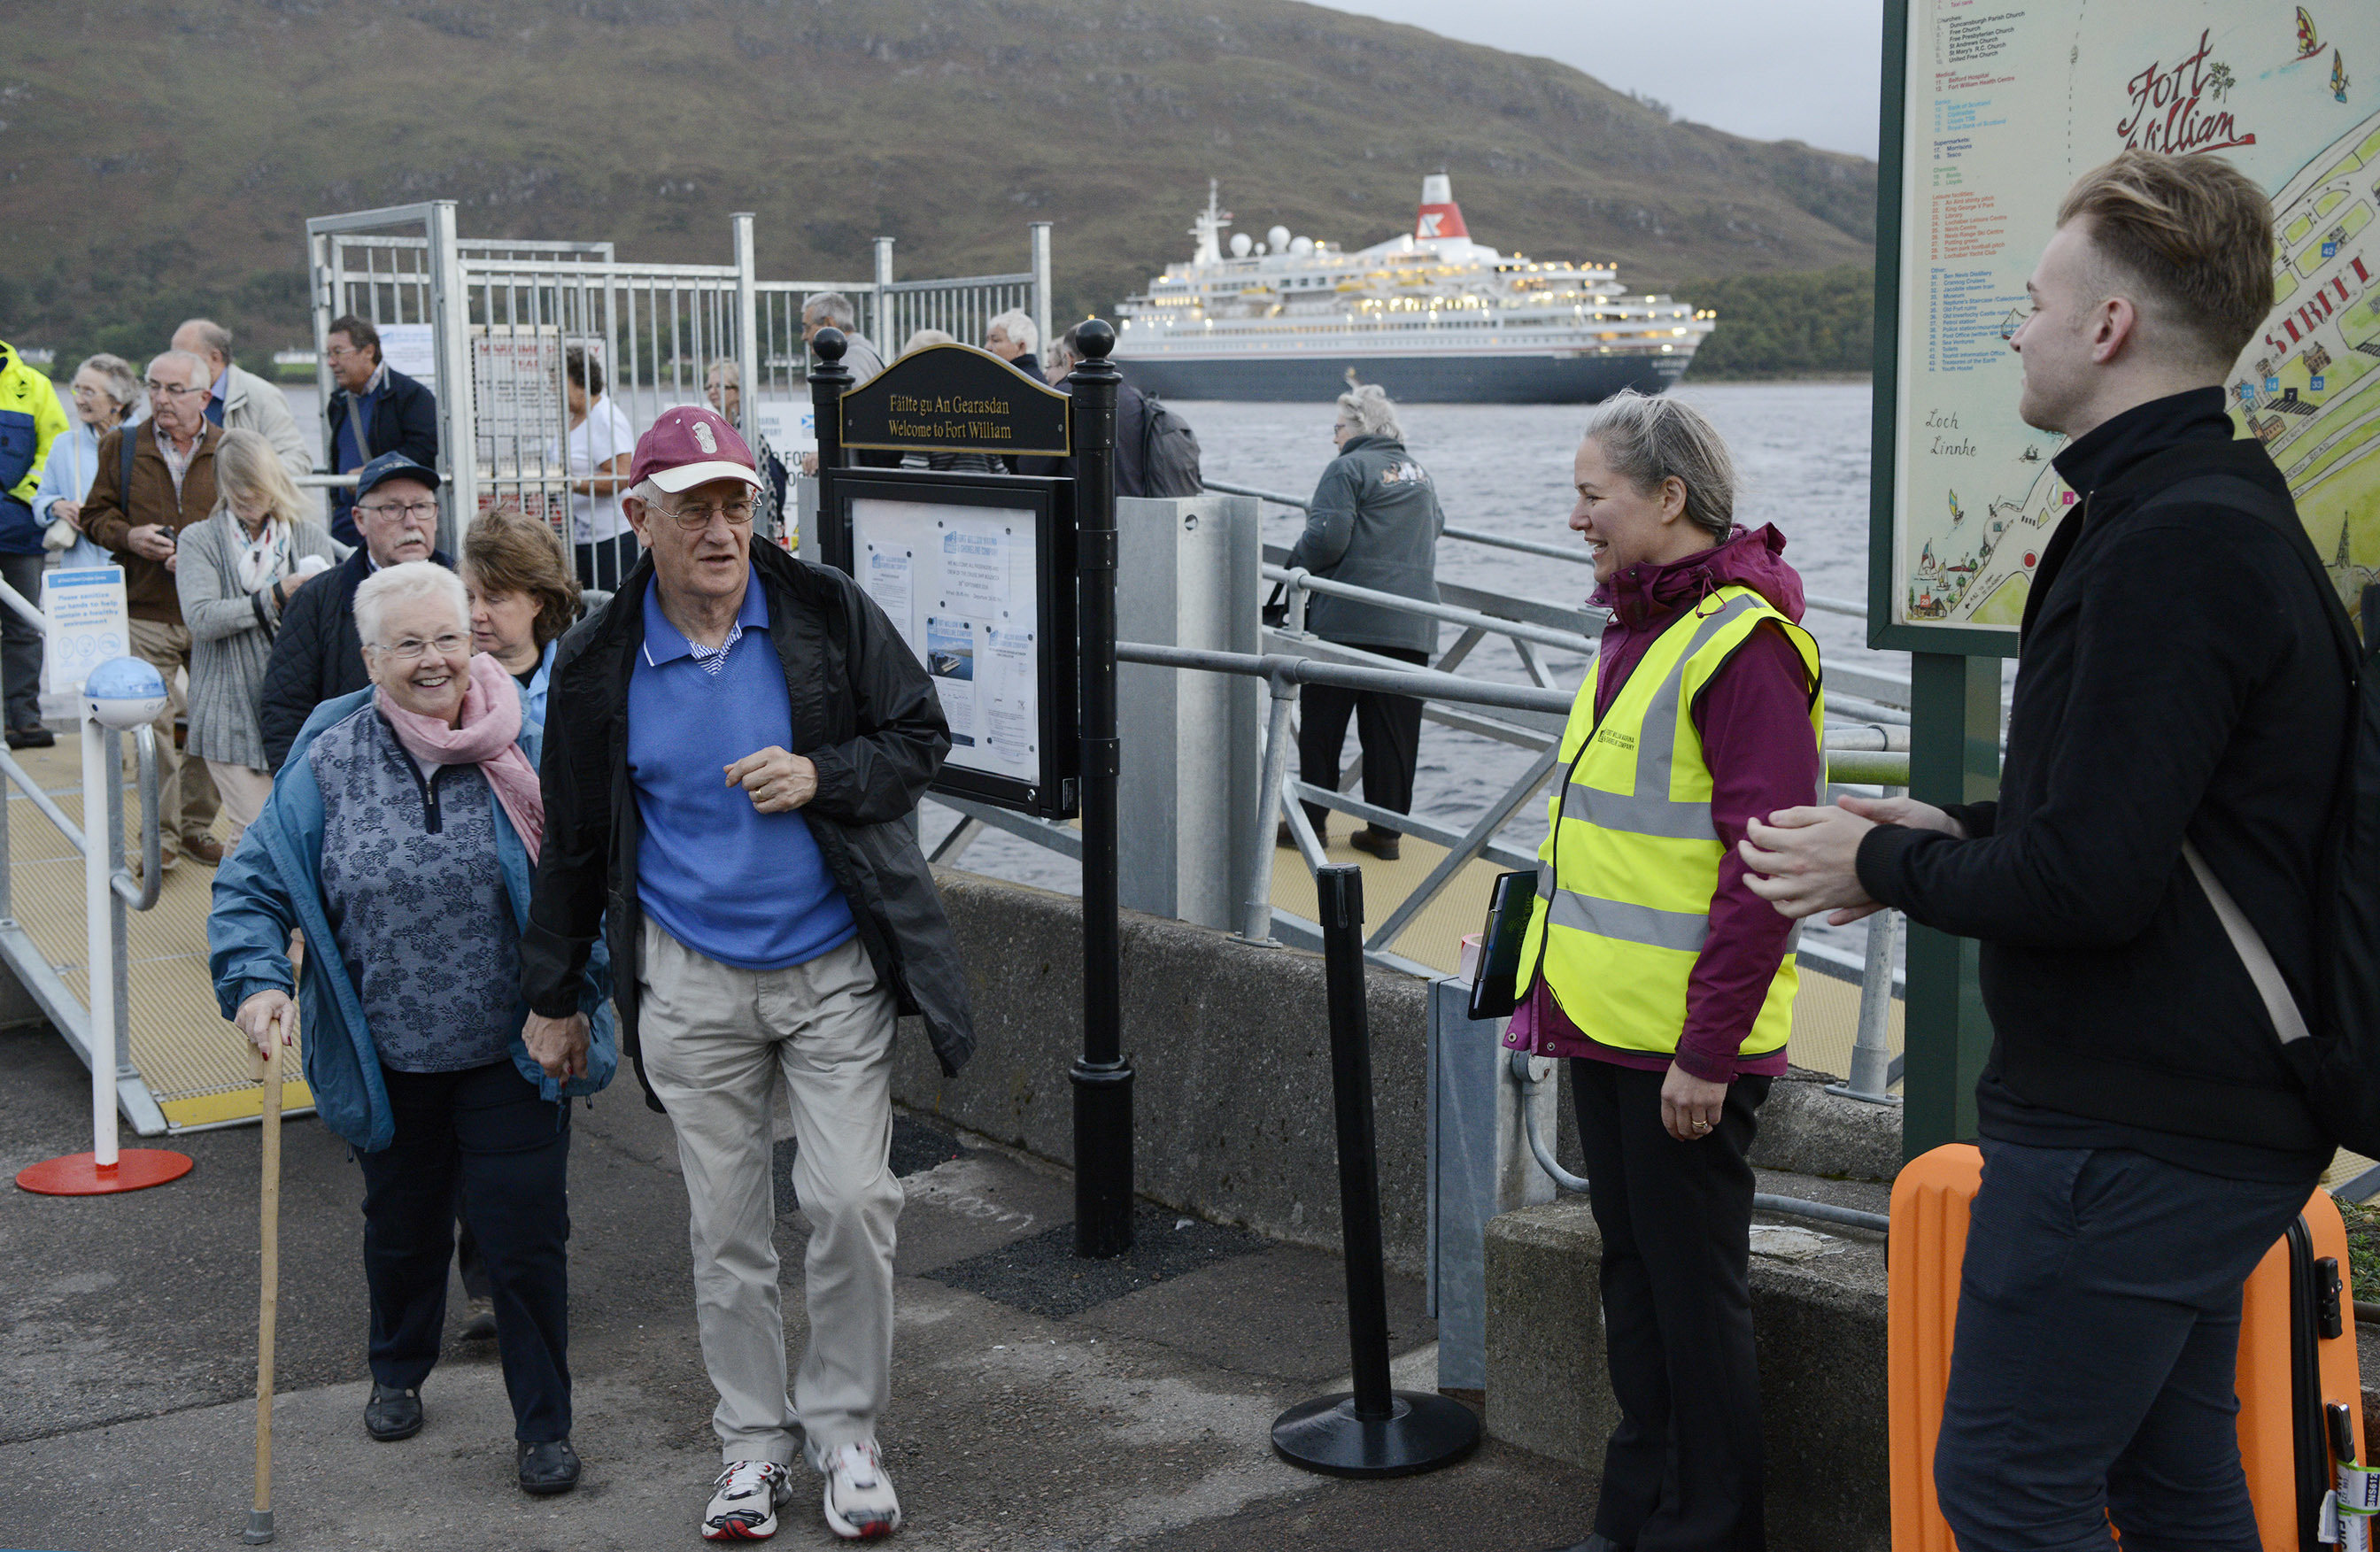 Boudicca passengers disembark to a warm welcome  from Sarah Kennedy of the Fort William Marina and Shoreline Company and other volunteers